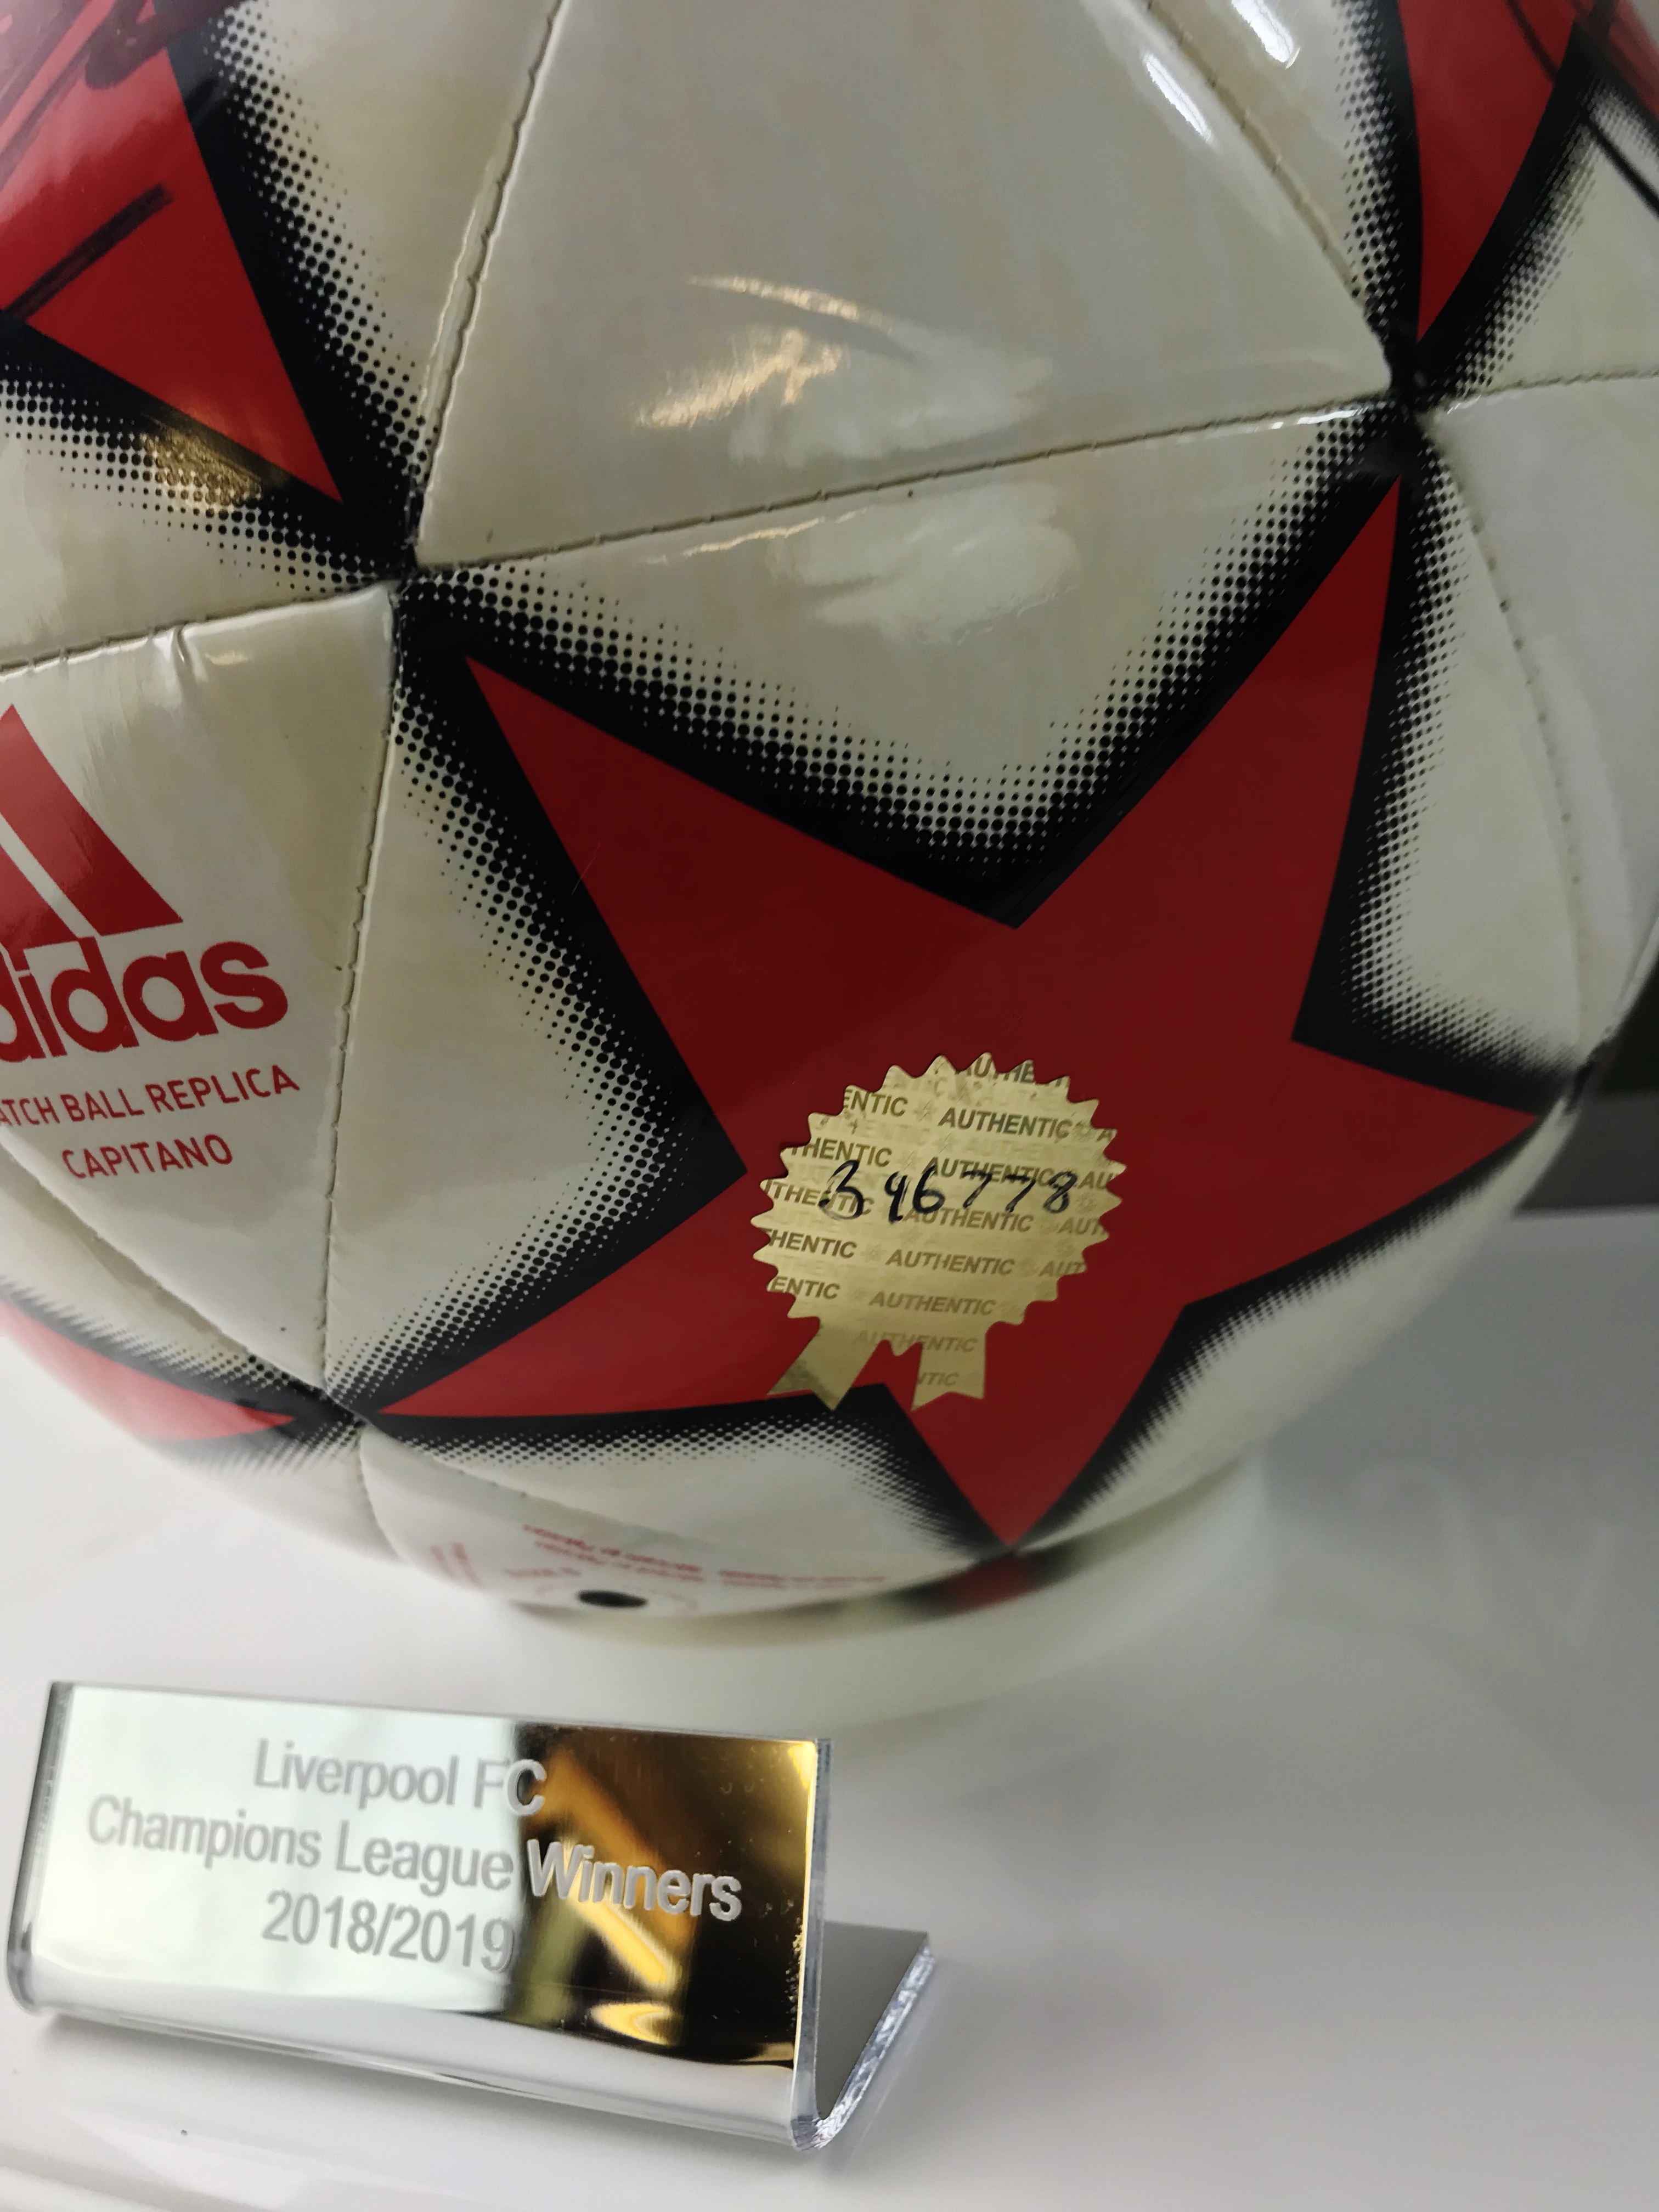 Liverpool FC Champions League Winner 2019 Signed Football & Case - Image 5 of 6